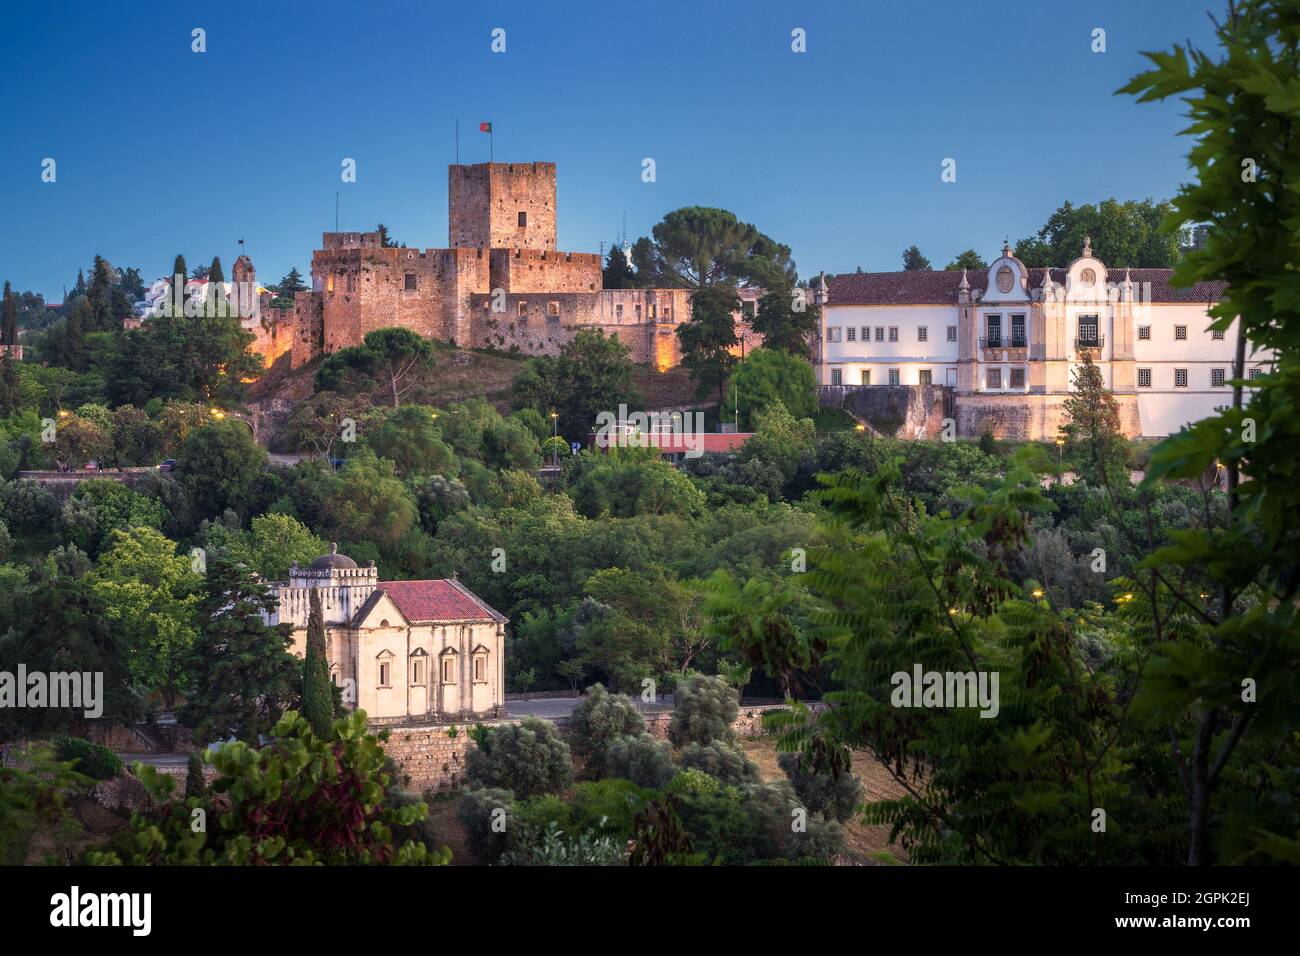 View at dusk of the castle of Tomar with the Convent of Christ on the side and the Chapel of Nossa Senhora da Conceição below, in Tomar, Portugal. Stock Photo